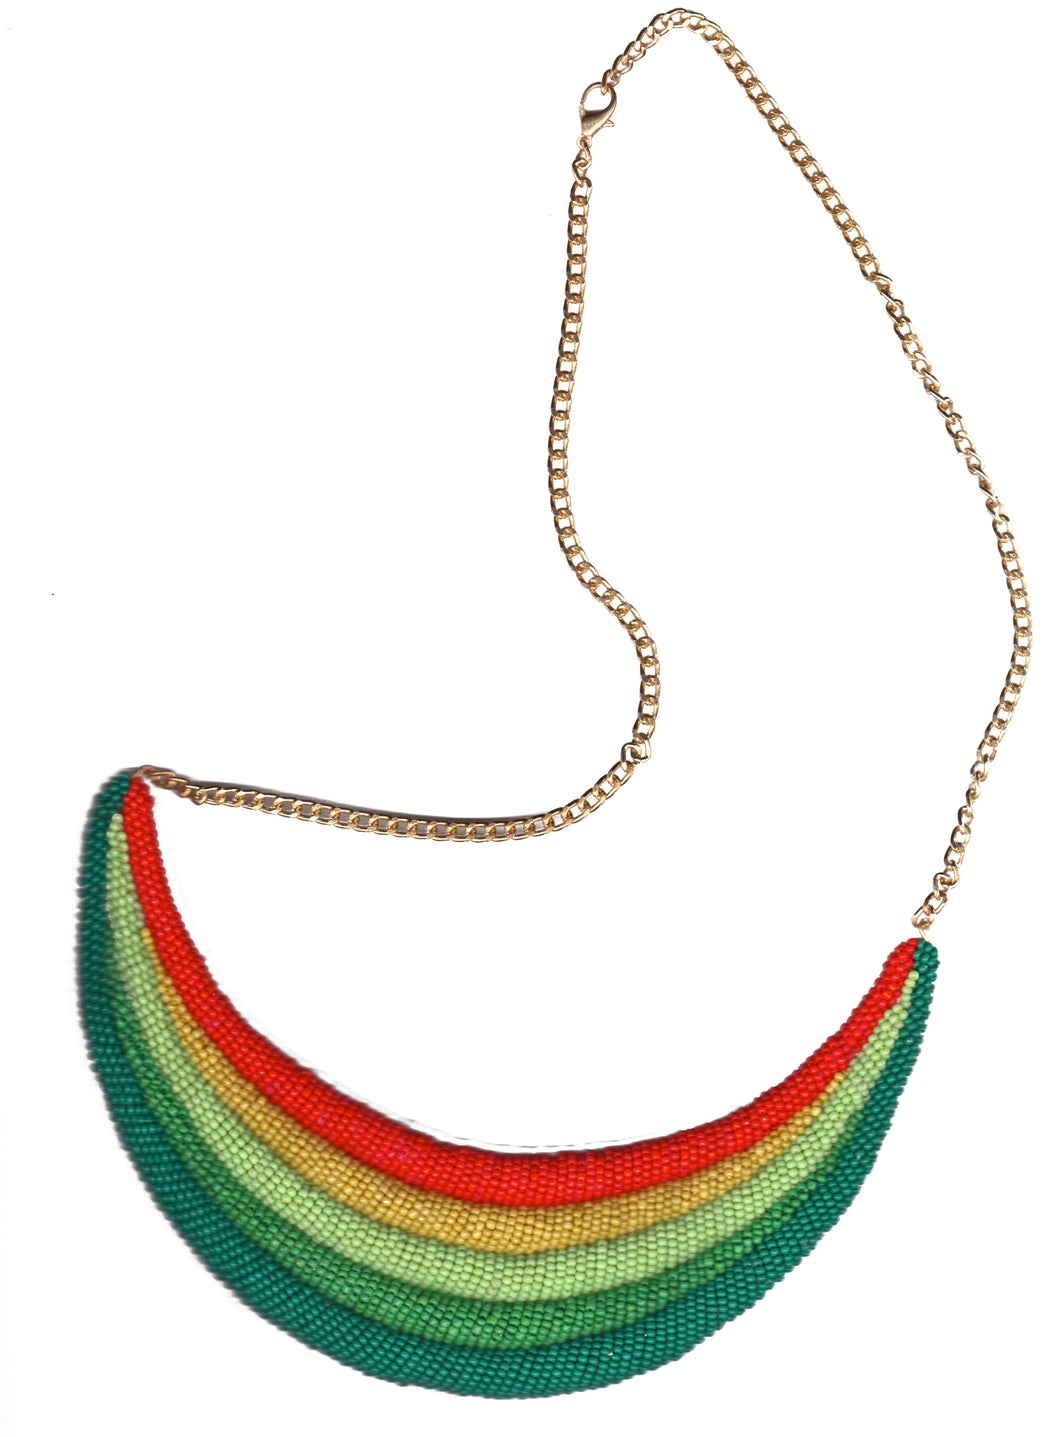 Rainbow Valley Green necklace - Family Affairs